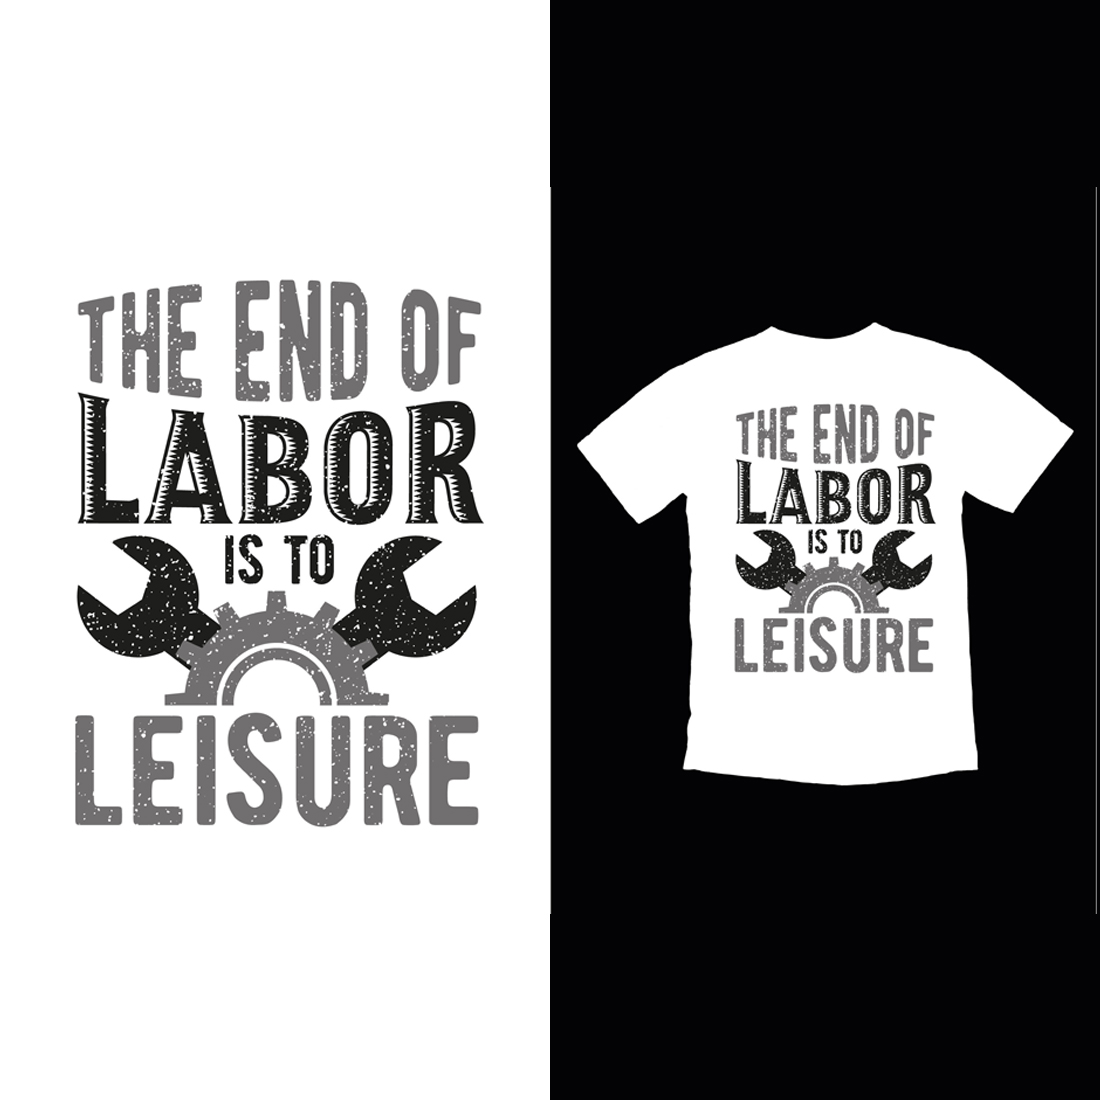 T - shirt that says the end of labor is to leisure.